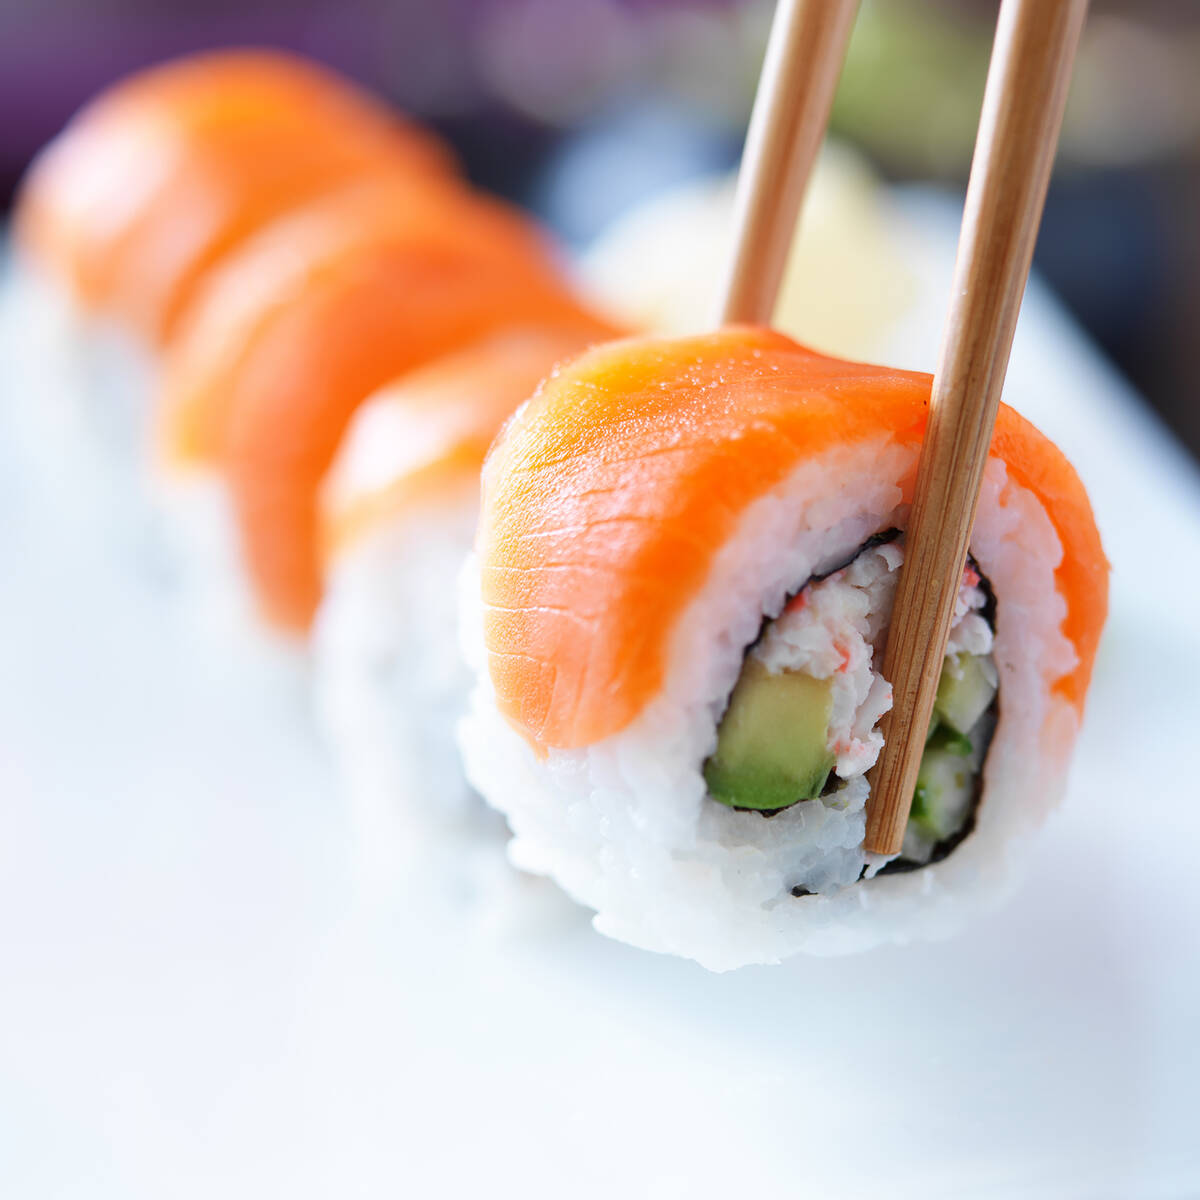 Sushi may be a perfect example of mindful eating, encouraging diners to take one bite at a time ...